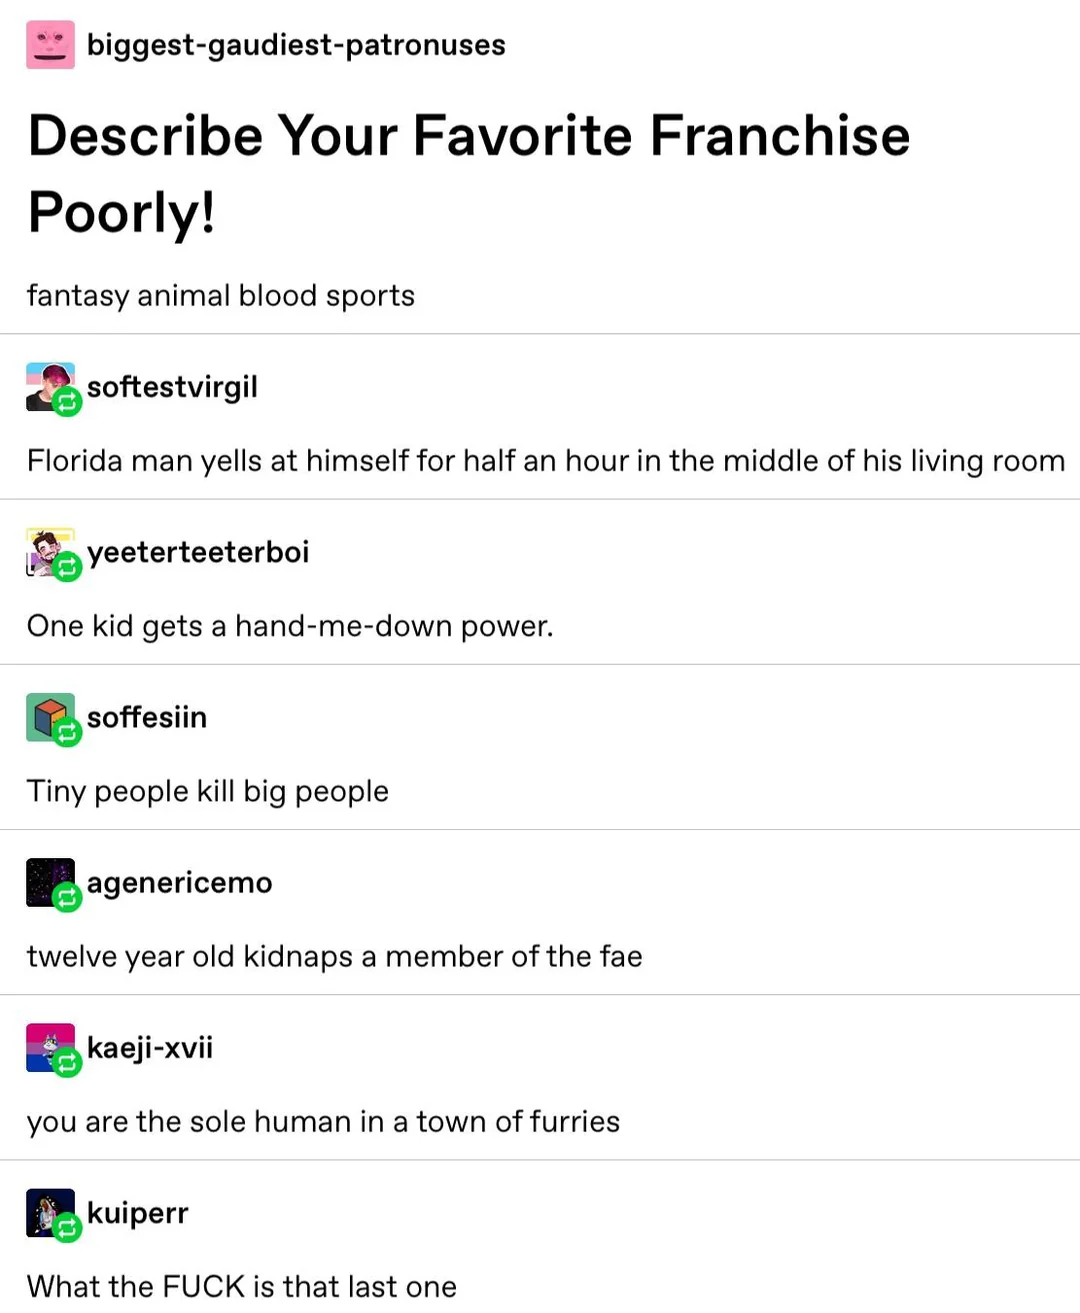 Tumblr post by biggest-gaudiest-patronuses saying "Describe your favourite franchise poorly", with the post contents of "fantasy animal blood sports." then a reblog says "florida man yells at himself for half an hour in his living room." another reblog saying "one kid gets a hand me down power" another reblog saying "tiny people kill big people" another saying "twelve year old kidnaps a member of the fae" with a reblog of "you are the sole human in a town of furries" the final reblog says "What the FUCK is that last one"